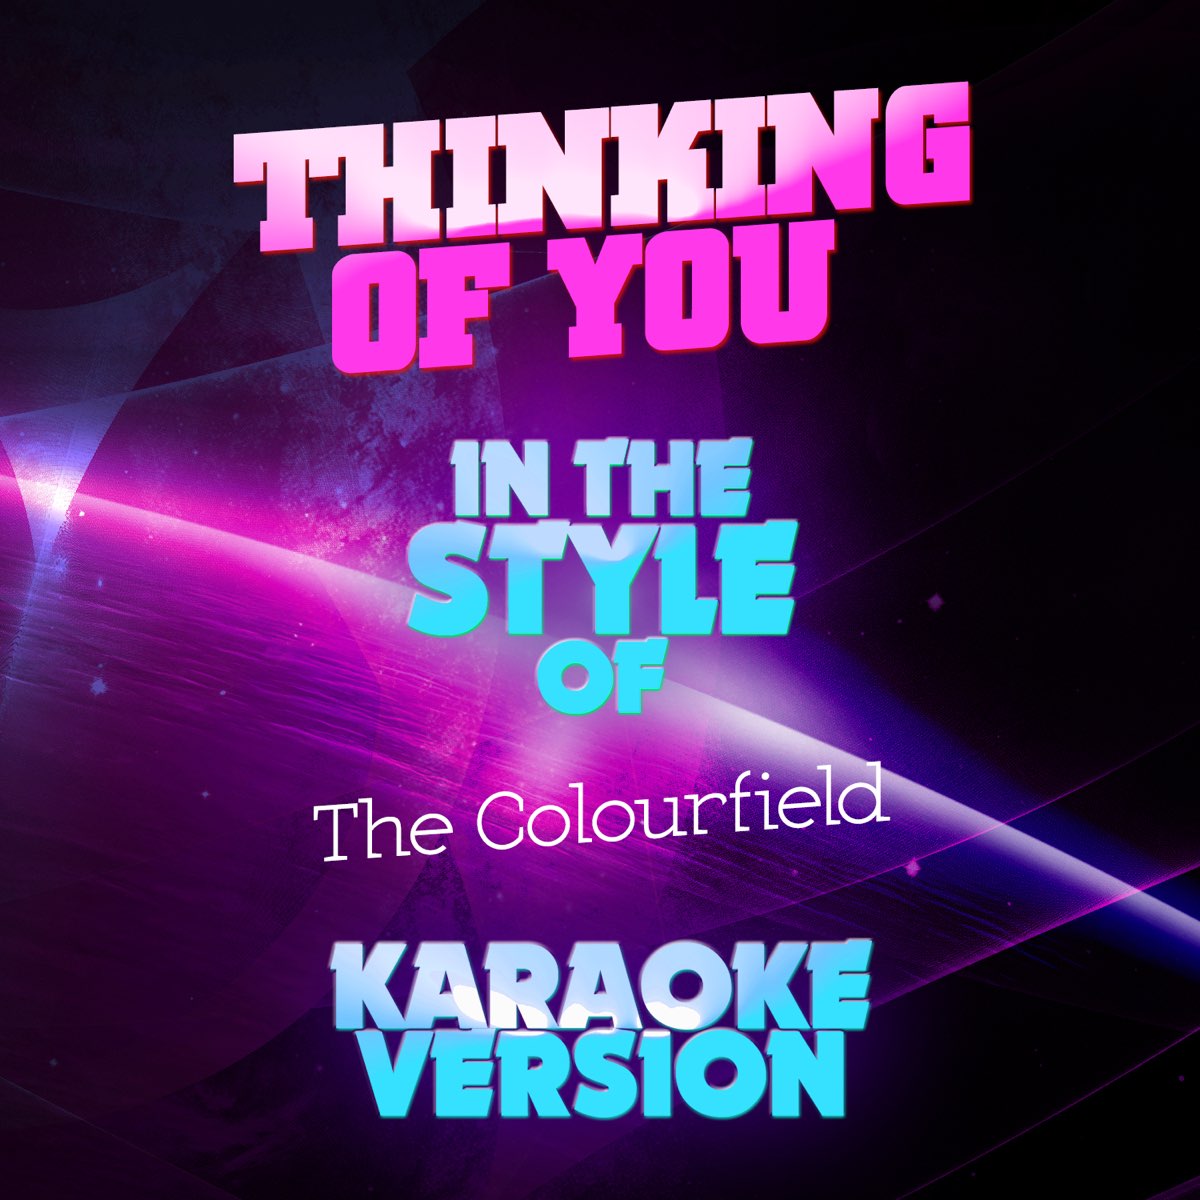 Thinking of You (In the Style of the Colourfield) [Karaoke Version] -  Single by Ameritz Audio Karaoke on Apple Music